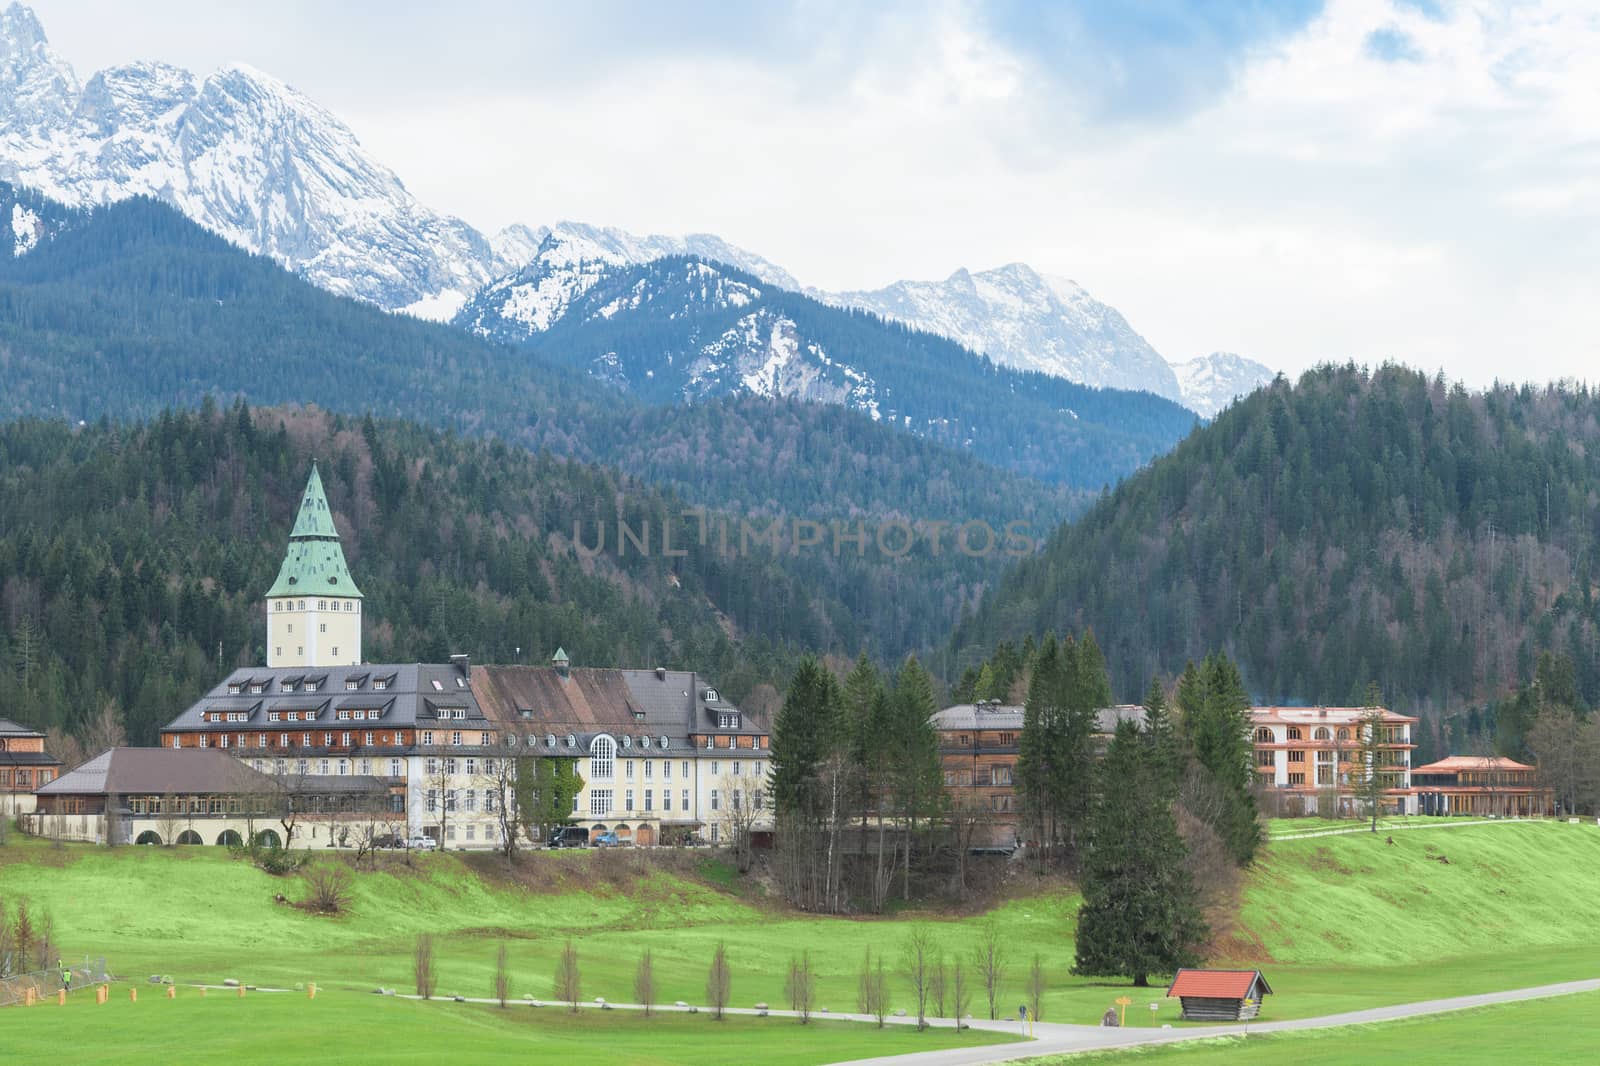 Garmisch, Germany - April 26, 2015: Hotel complex Schloss Elmau in Bavarian Alps is the venue of summit G8 members. The attendees will include the leaders of the seven G7 member states, as well as representatives of the European Union.